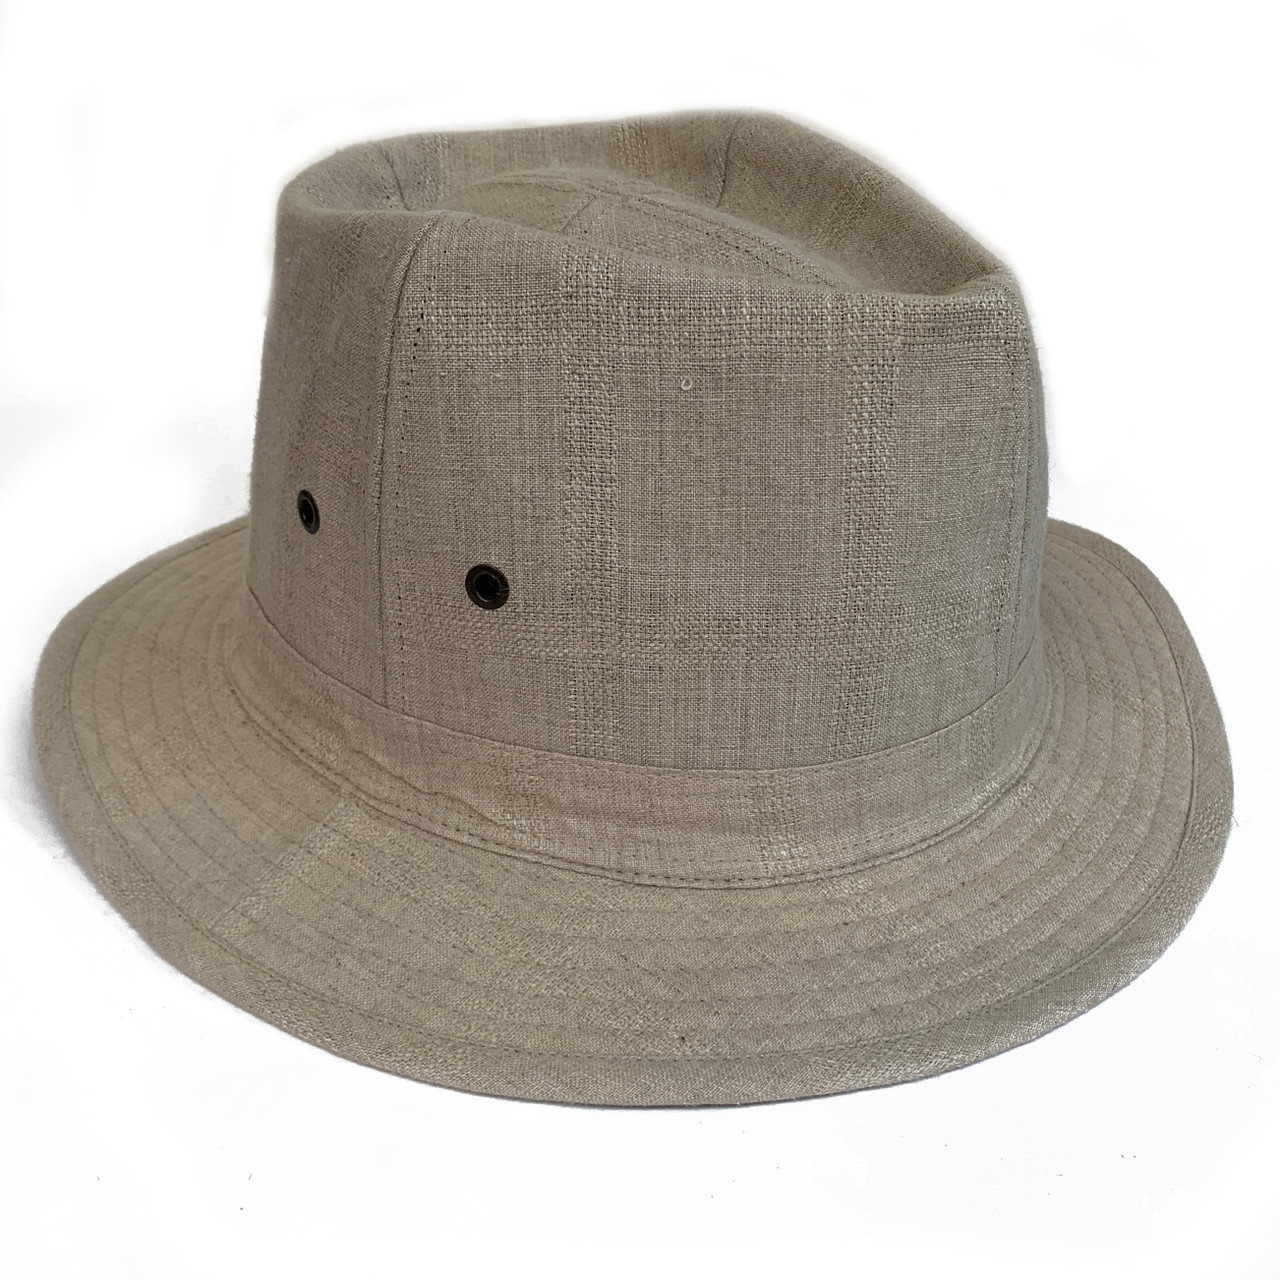 Hills Hats - Sports Dry Bucket Hat - The Tin Shed